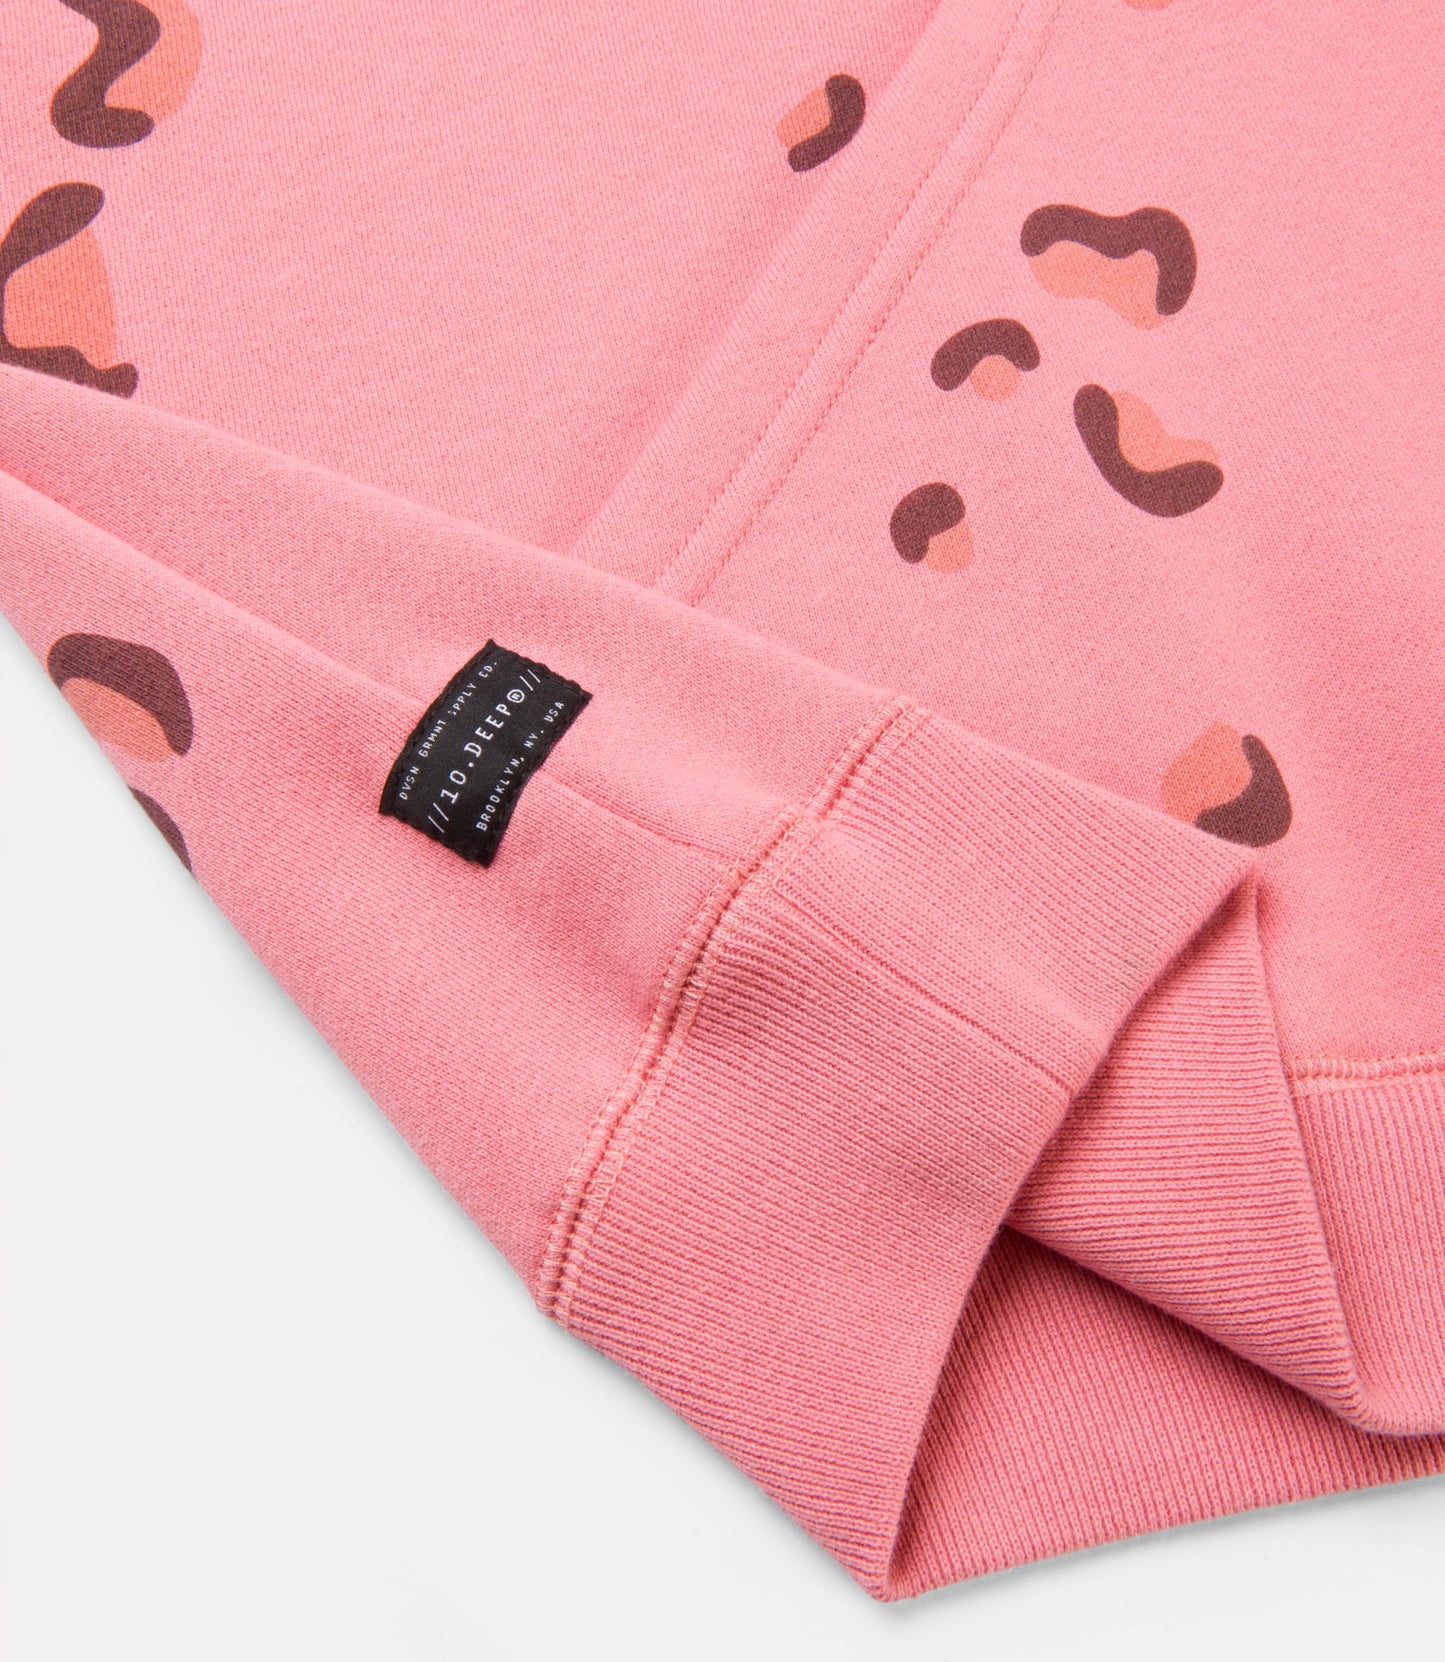 10Deep - Sound & Fury Men's Hoodie, Pink Chips - The Giant Peach